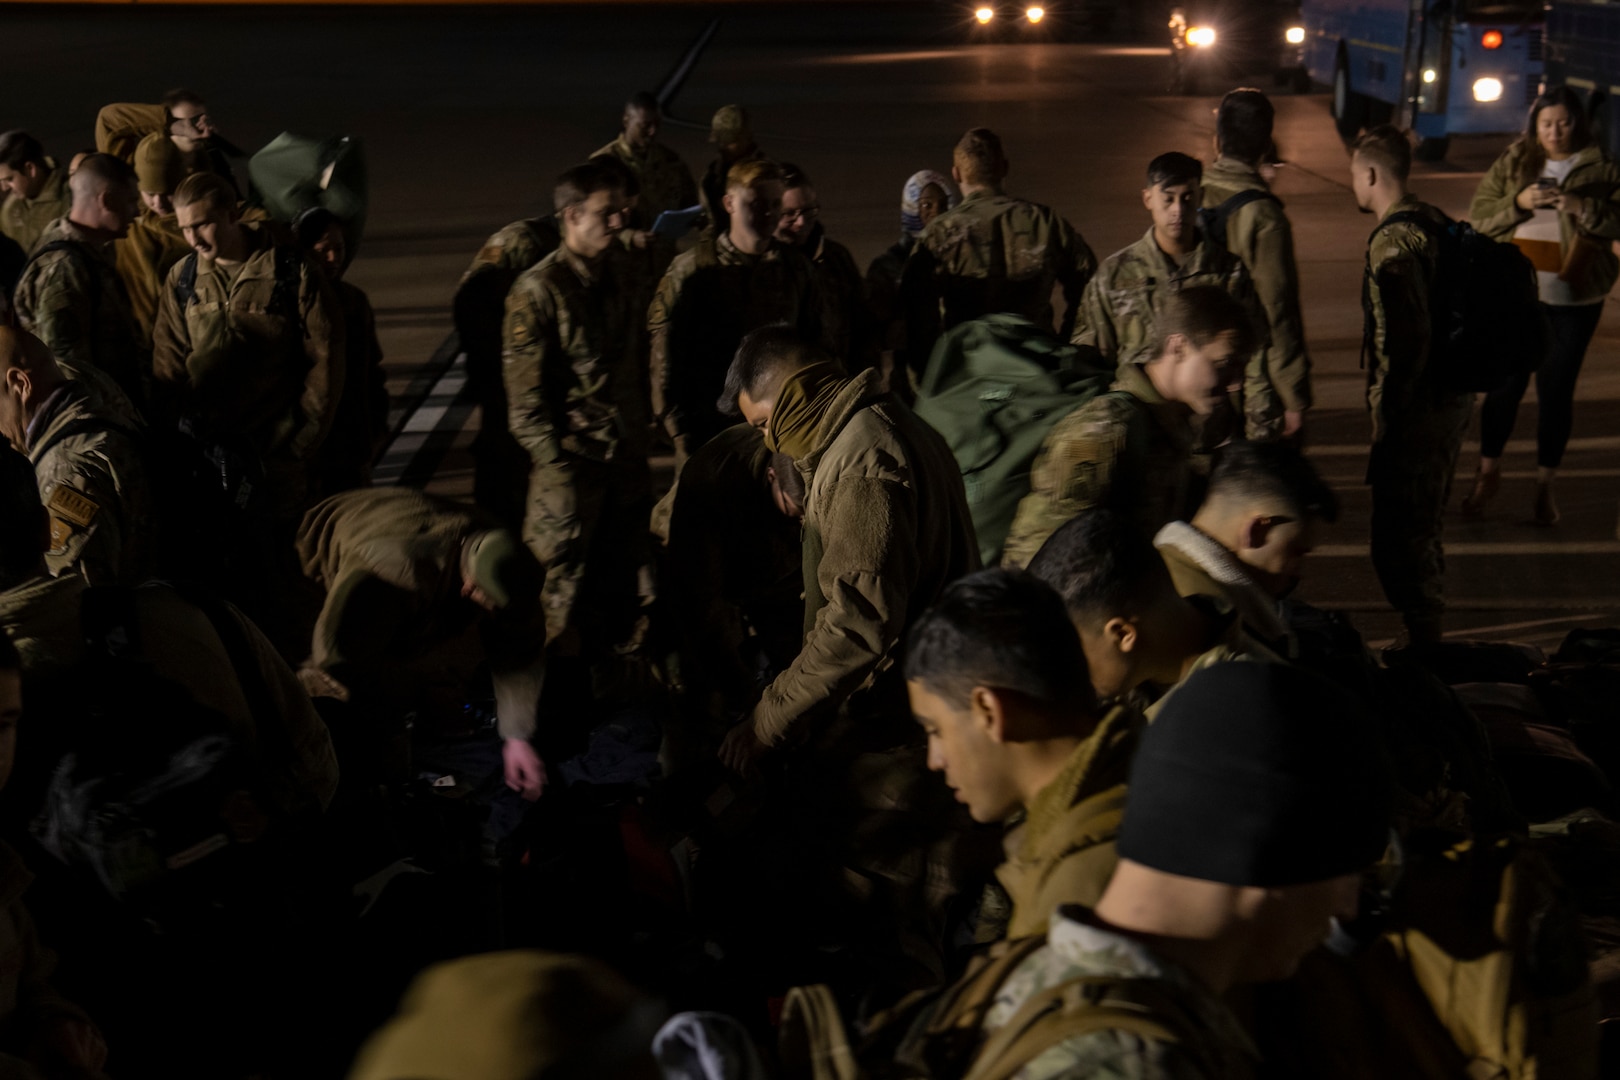 Airmen assigned to the 7th Bomb Wing look for their luggage after returning to Dyess Air Force Base, Texas, Nov. 18, 2021, from the Bomber Task Force Europe deployment.